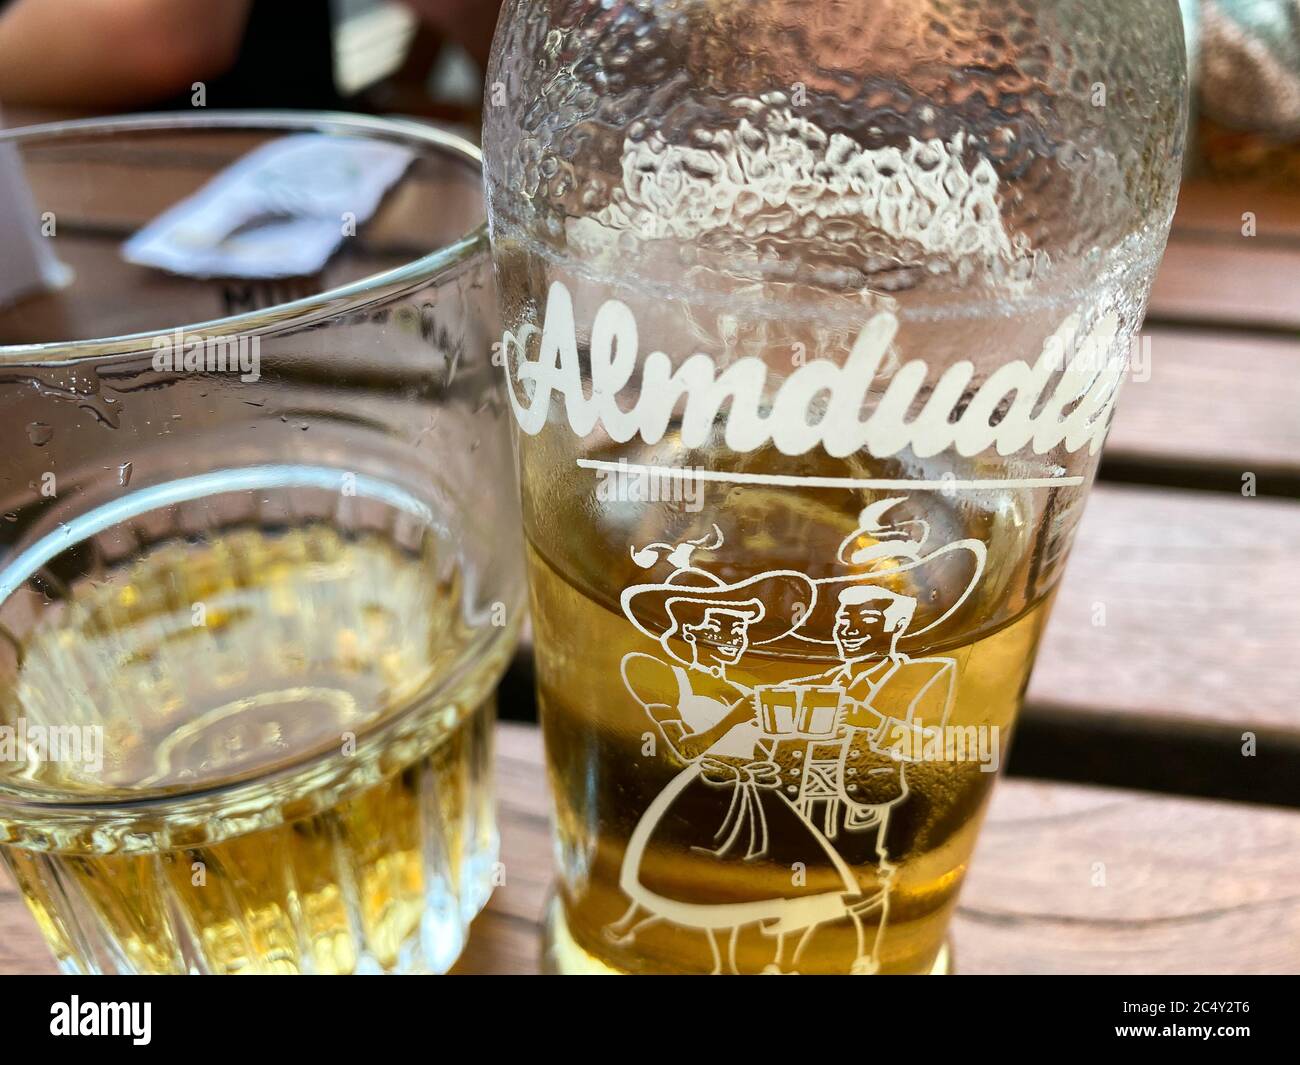 Haarlem, Netherlands - June 25. 2020: View on isolated glass and bottle of austrian herb extract lemonade on wood table Stock Photo